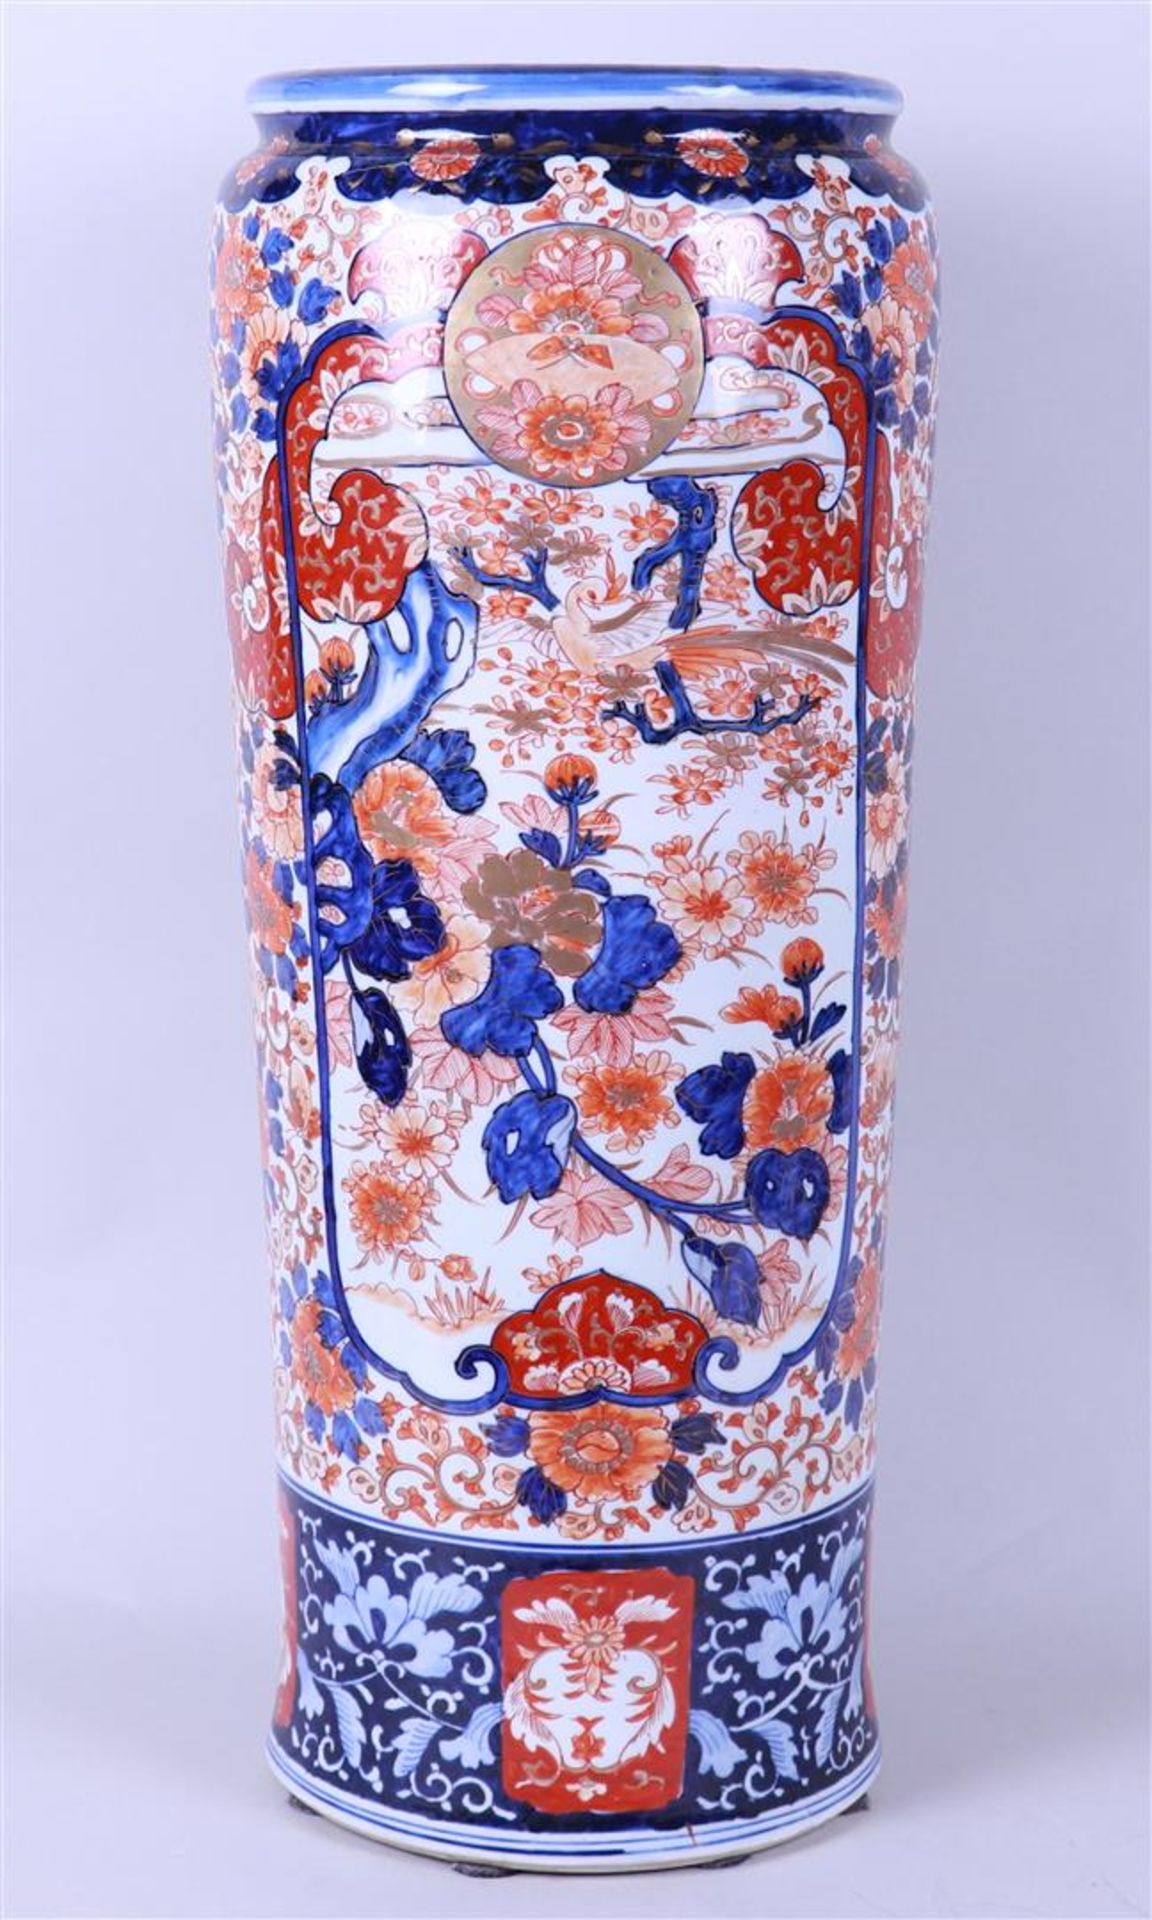 A large Imari umbrella stand with floral decor. Japan, 19th century.
